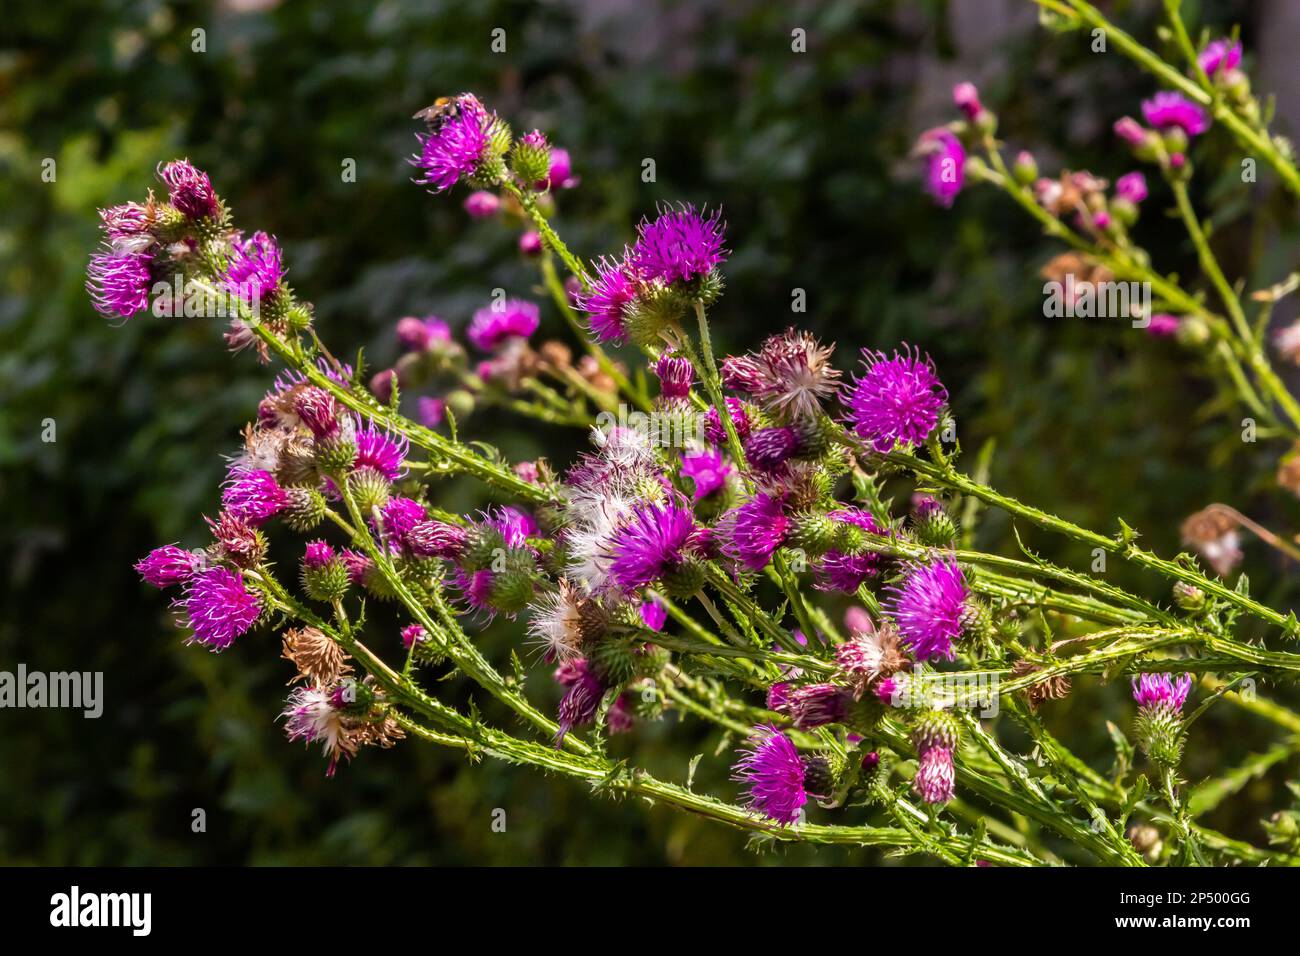 Flowering creeping thistle Cirsium arvense, also Canada thistle or field thistle. The creeping thistle is considered a noxious weed in many countries. Stock Photo